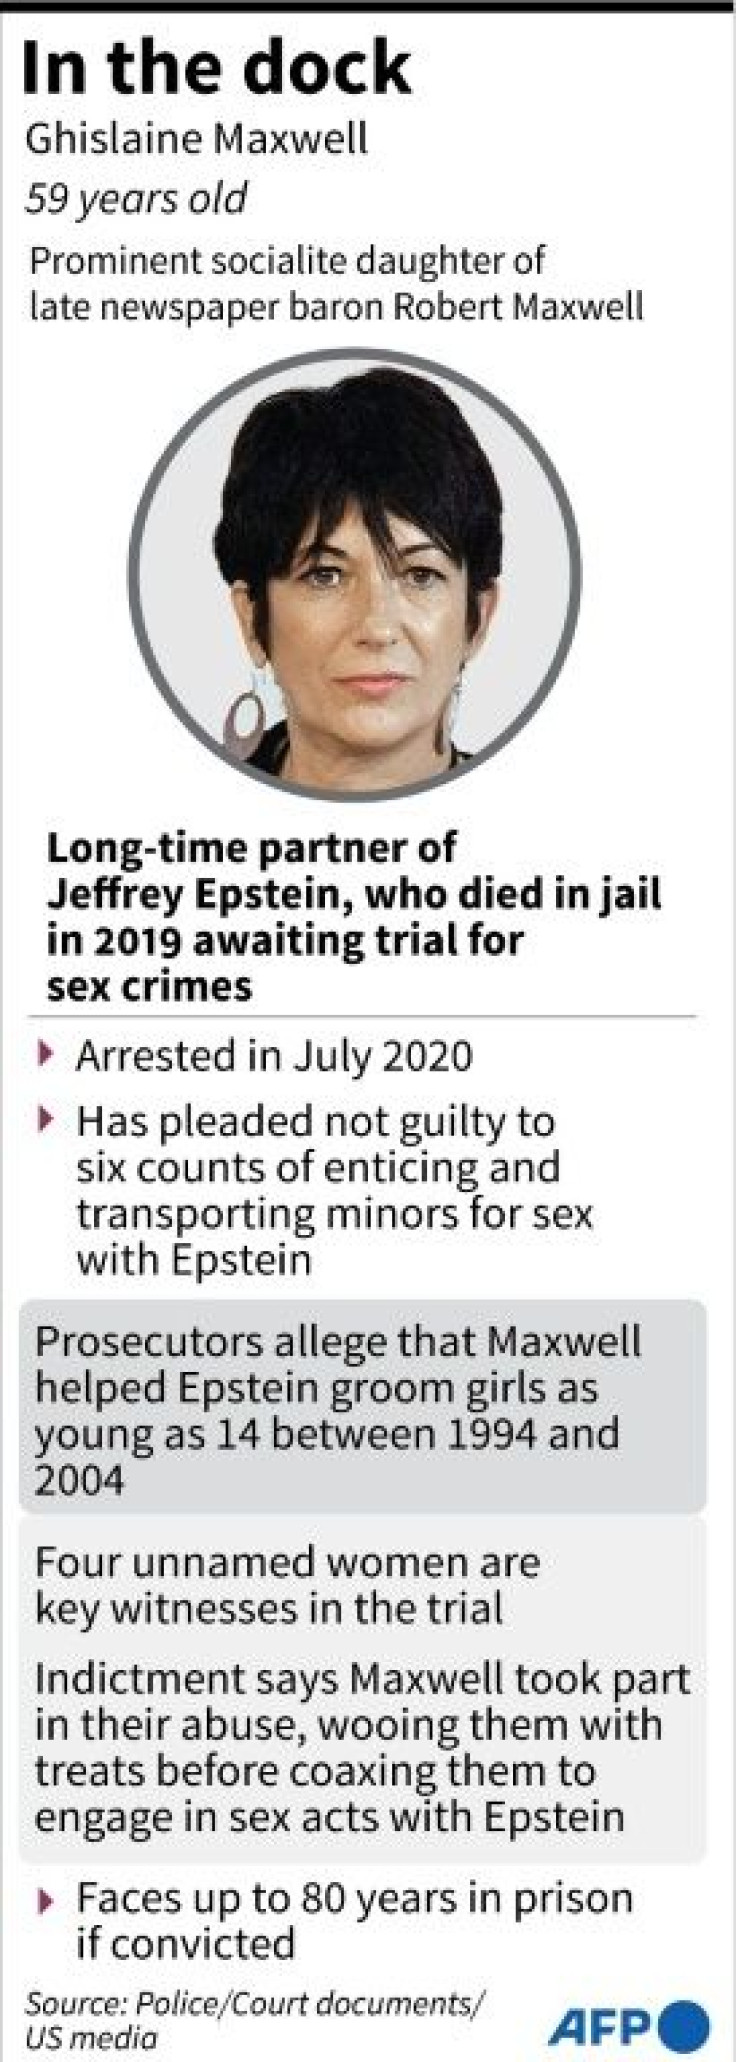 Factfile on Ghislaine Maxwell, on trial in New York for sex crimes related to Jeffrey Epstein